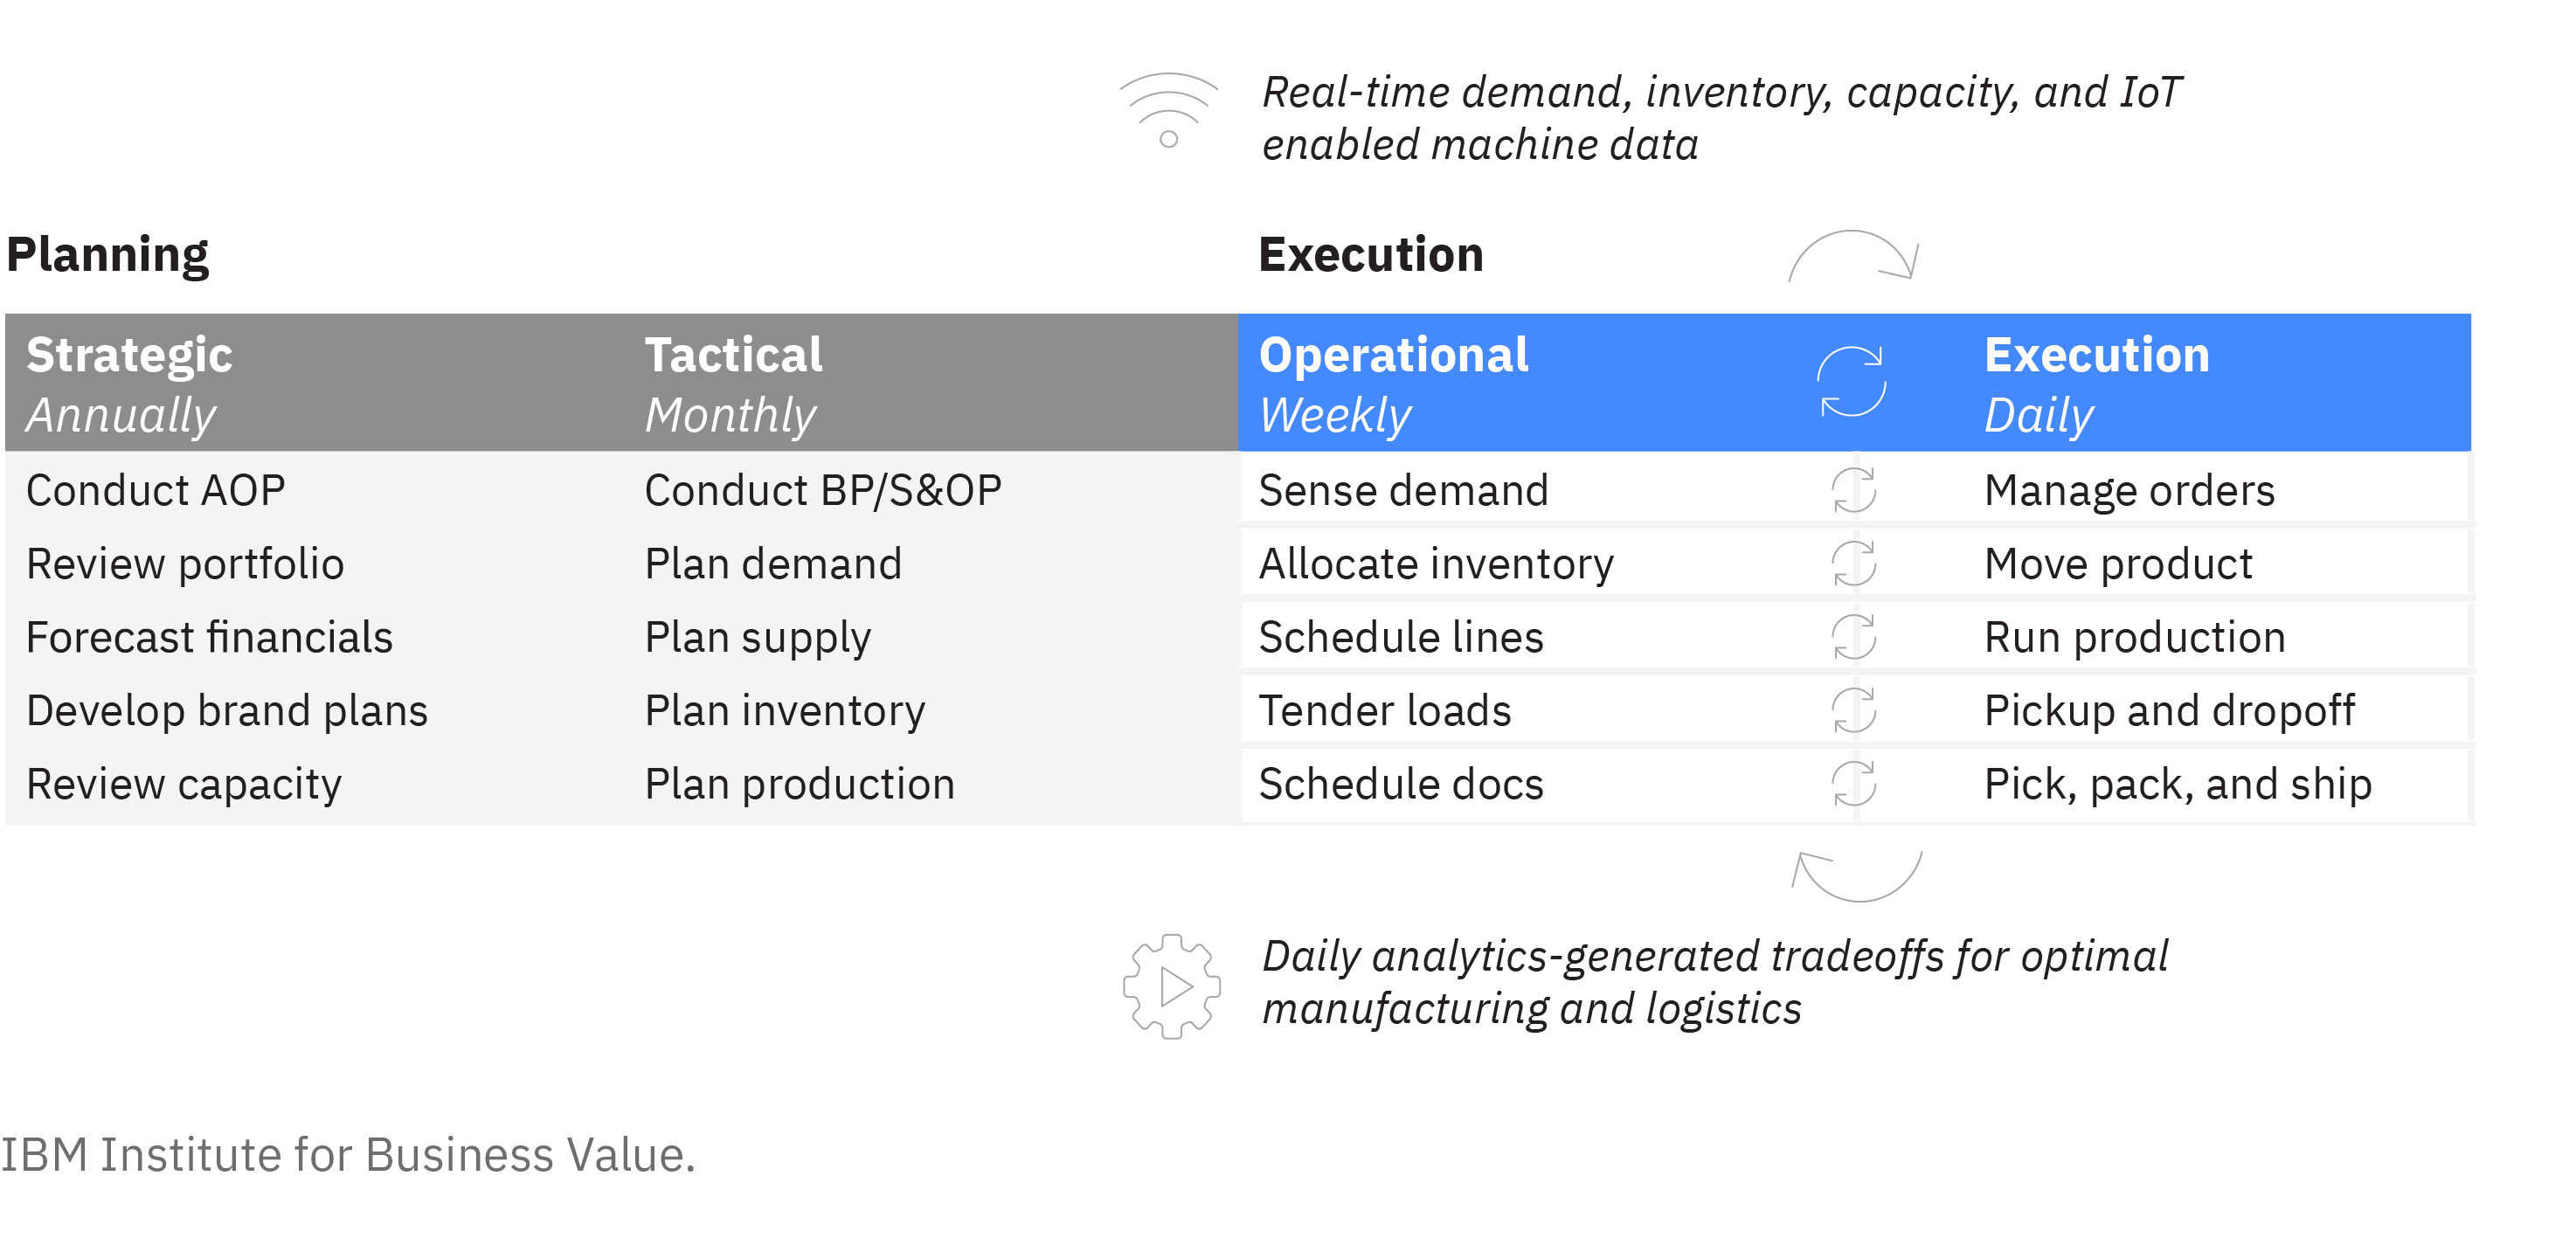 Agile execution incorporates daily analytics-generated tradeoffs for optimal manufacturing and logistics.